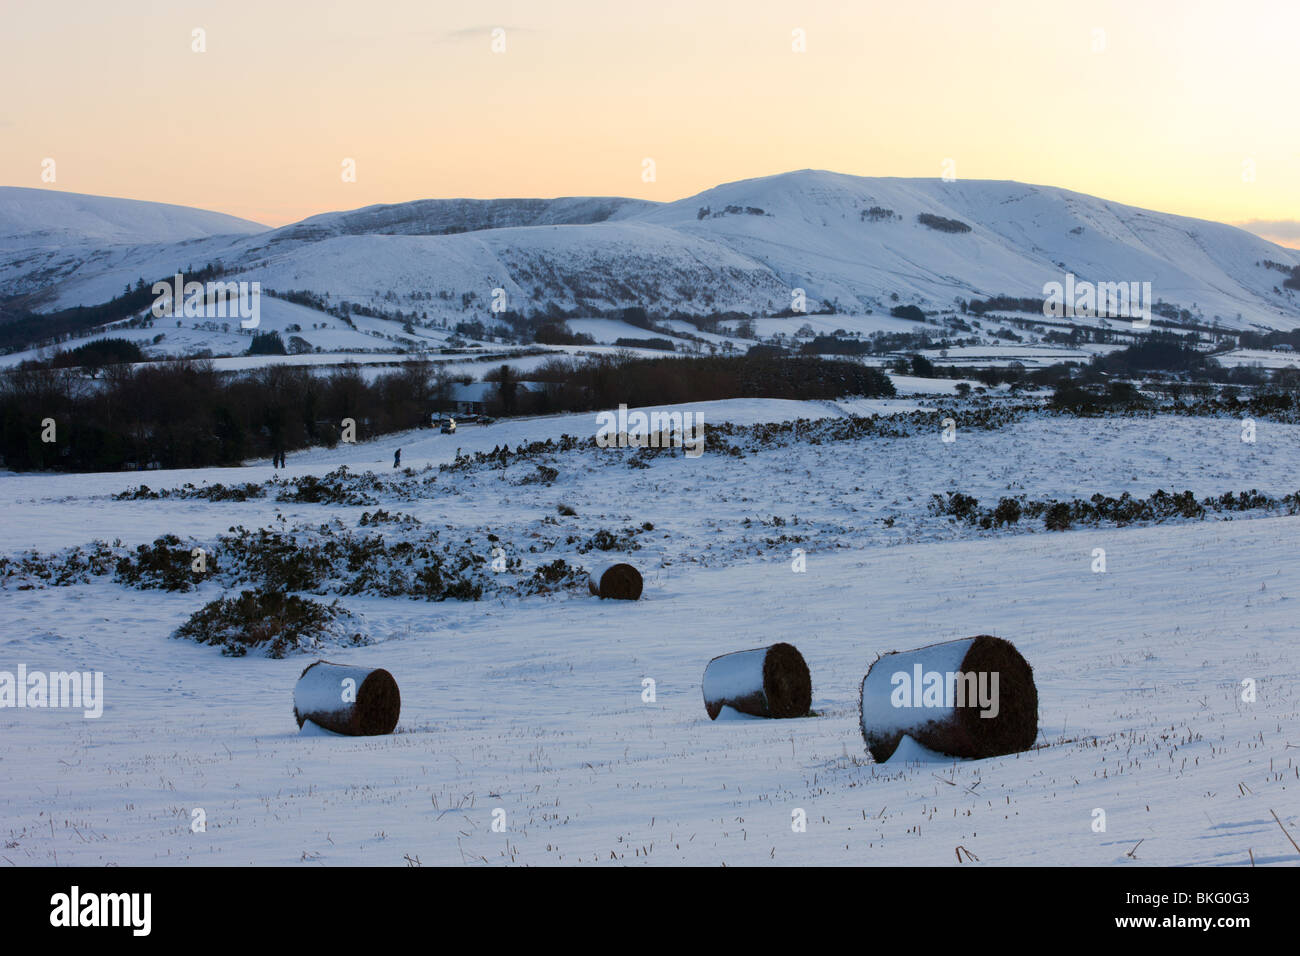 Snow covered bracken bales on Mynydd Illtud Common backed by snowy mountains, Brecon Beacons National Park, Powys, Wales, UK. Stock Photo